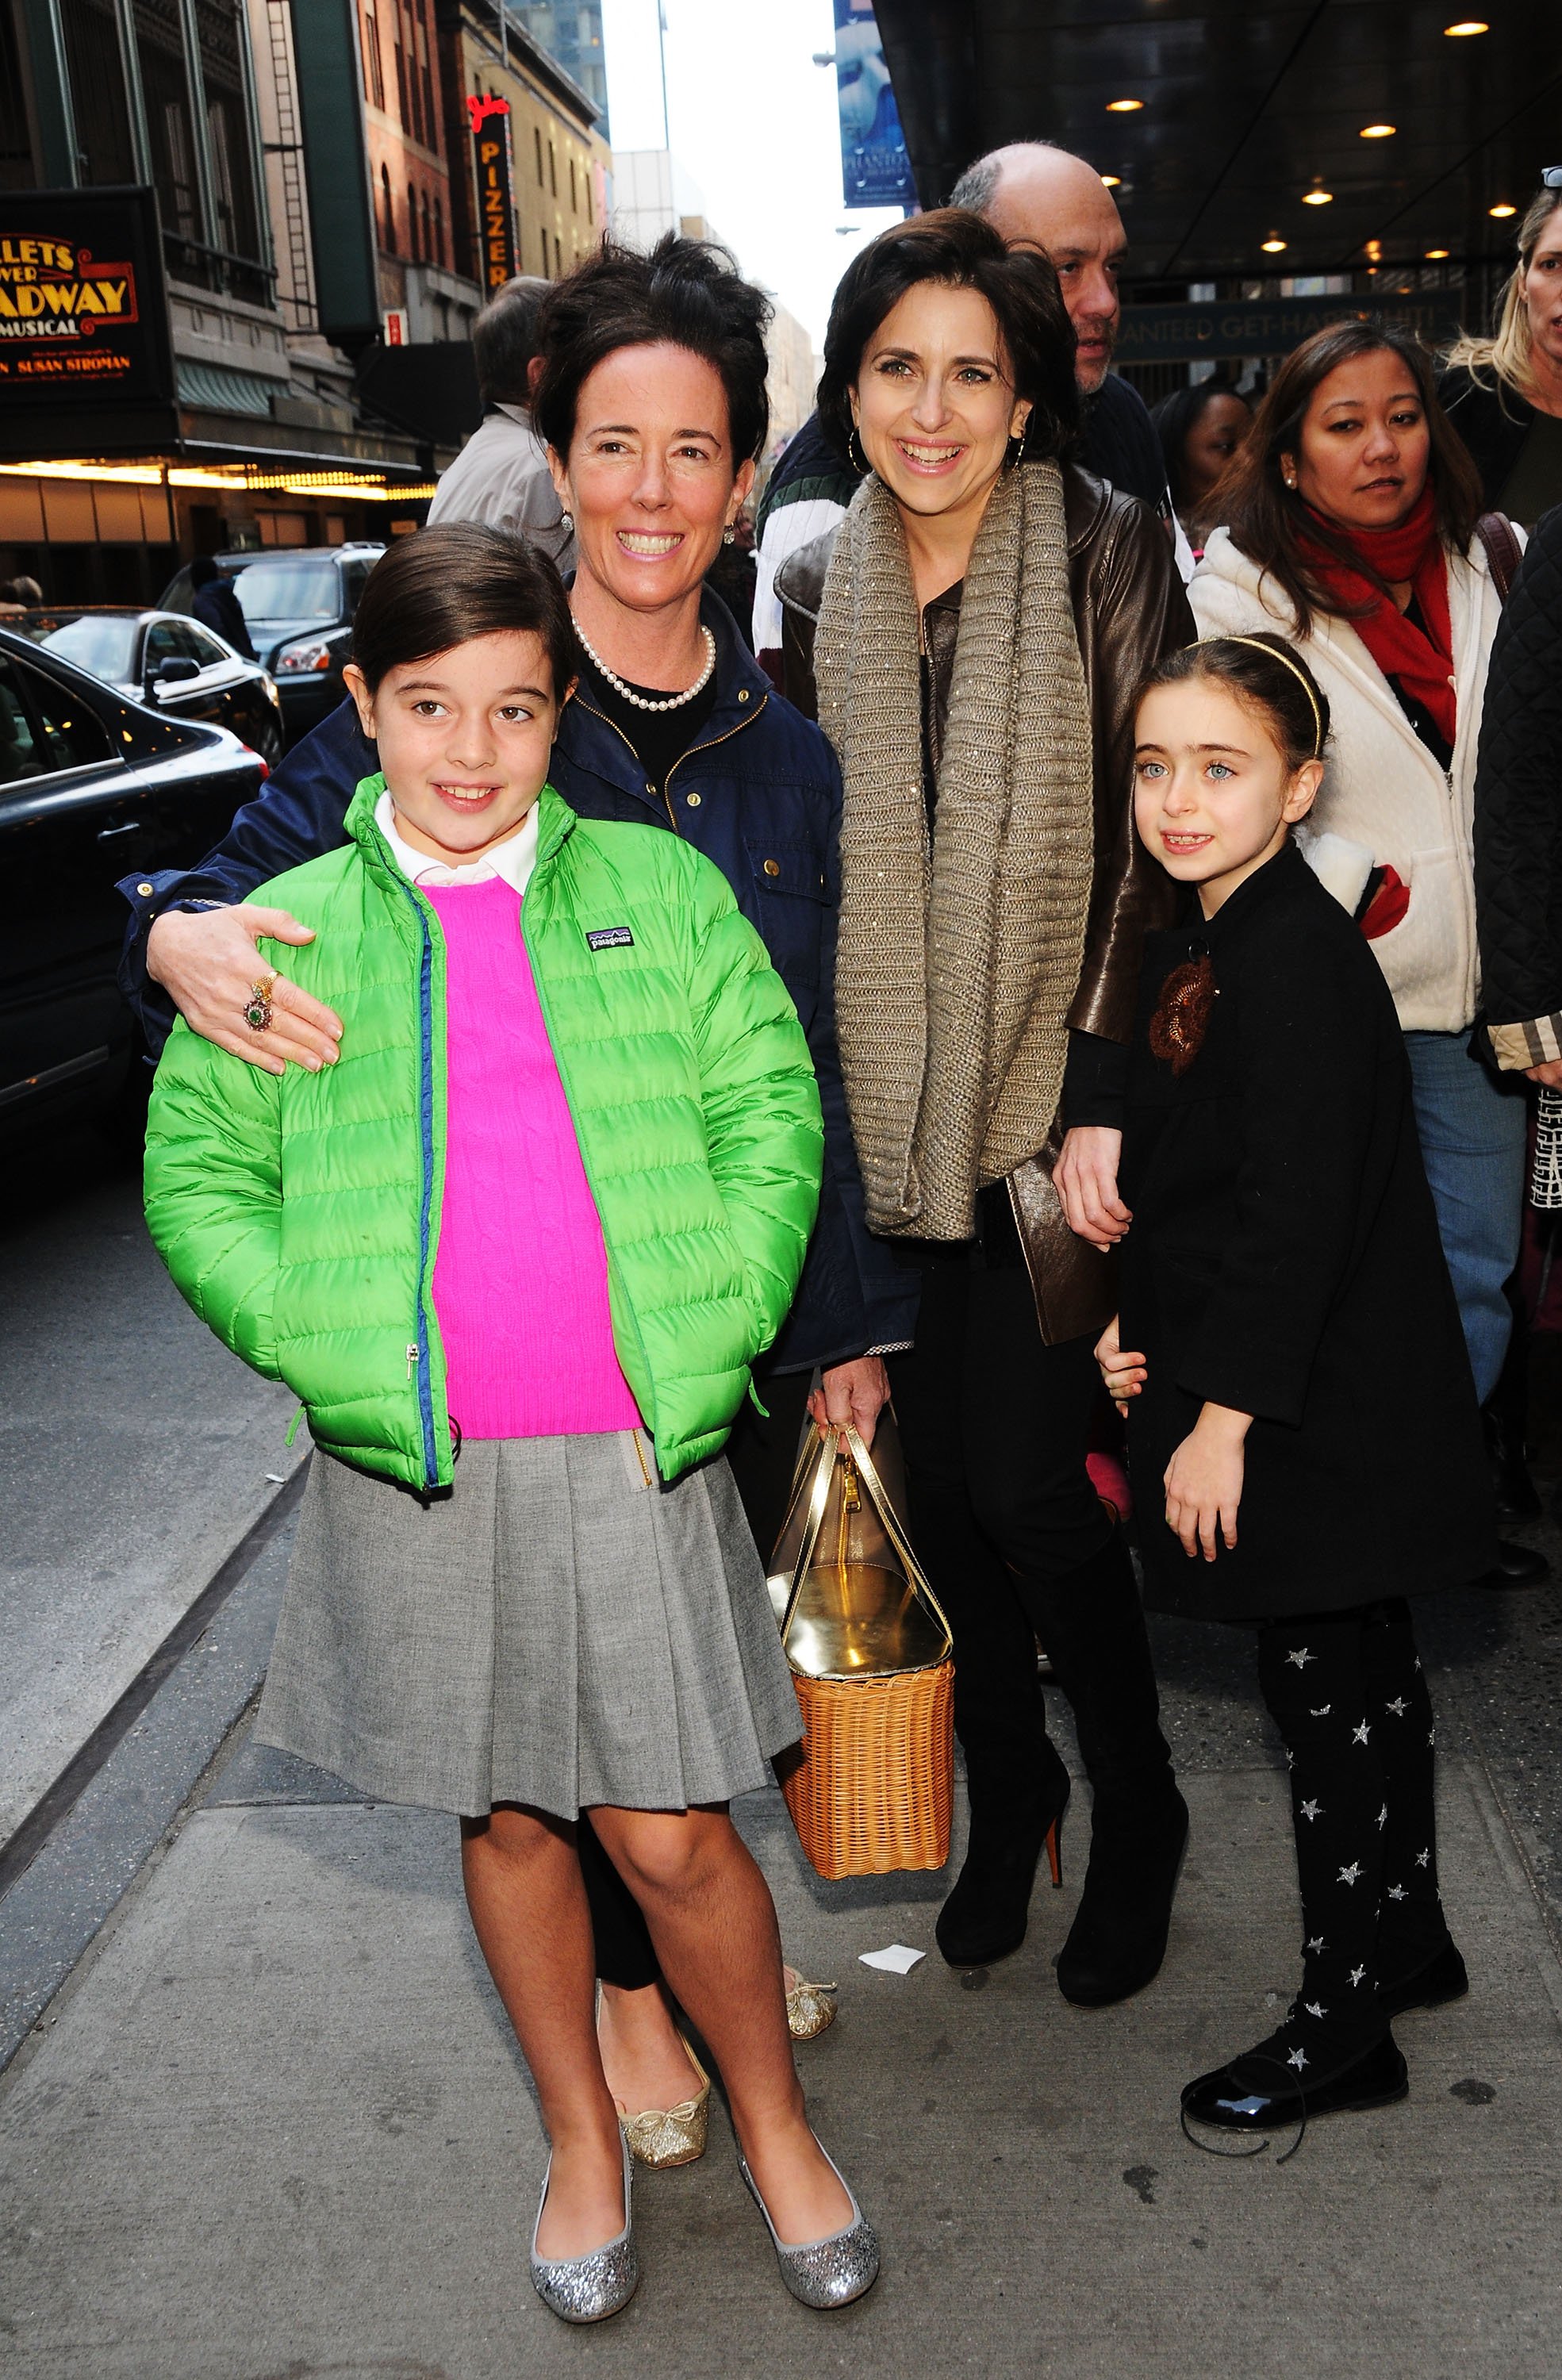 Designer Kate Spade with daughter Beatrix Spade  and Darcy Miller with her daughter Daisy Nussabaum at the 5,000 performance celebration of "Mamma Mia!" on Broadway at Broadhurst Theatre on November 9, 2013 in New York City. | Source: Getty Images